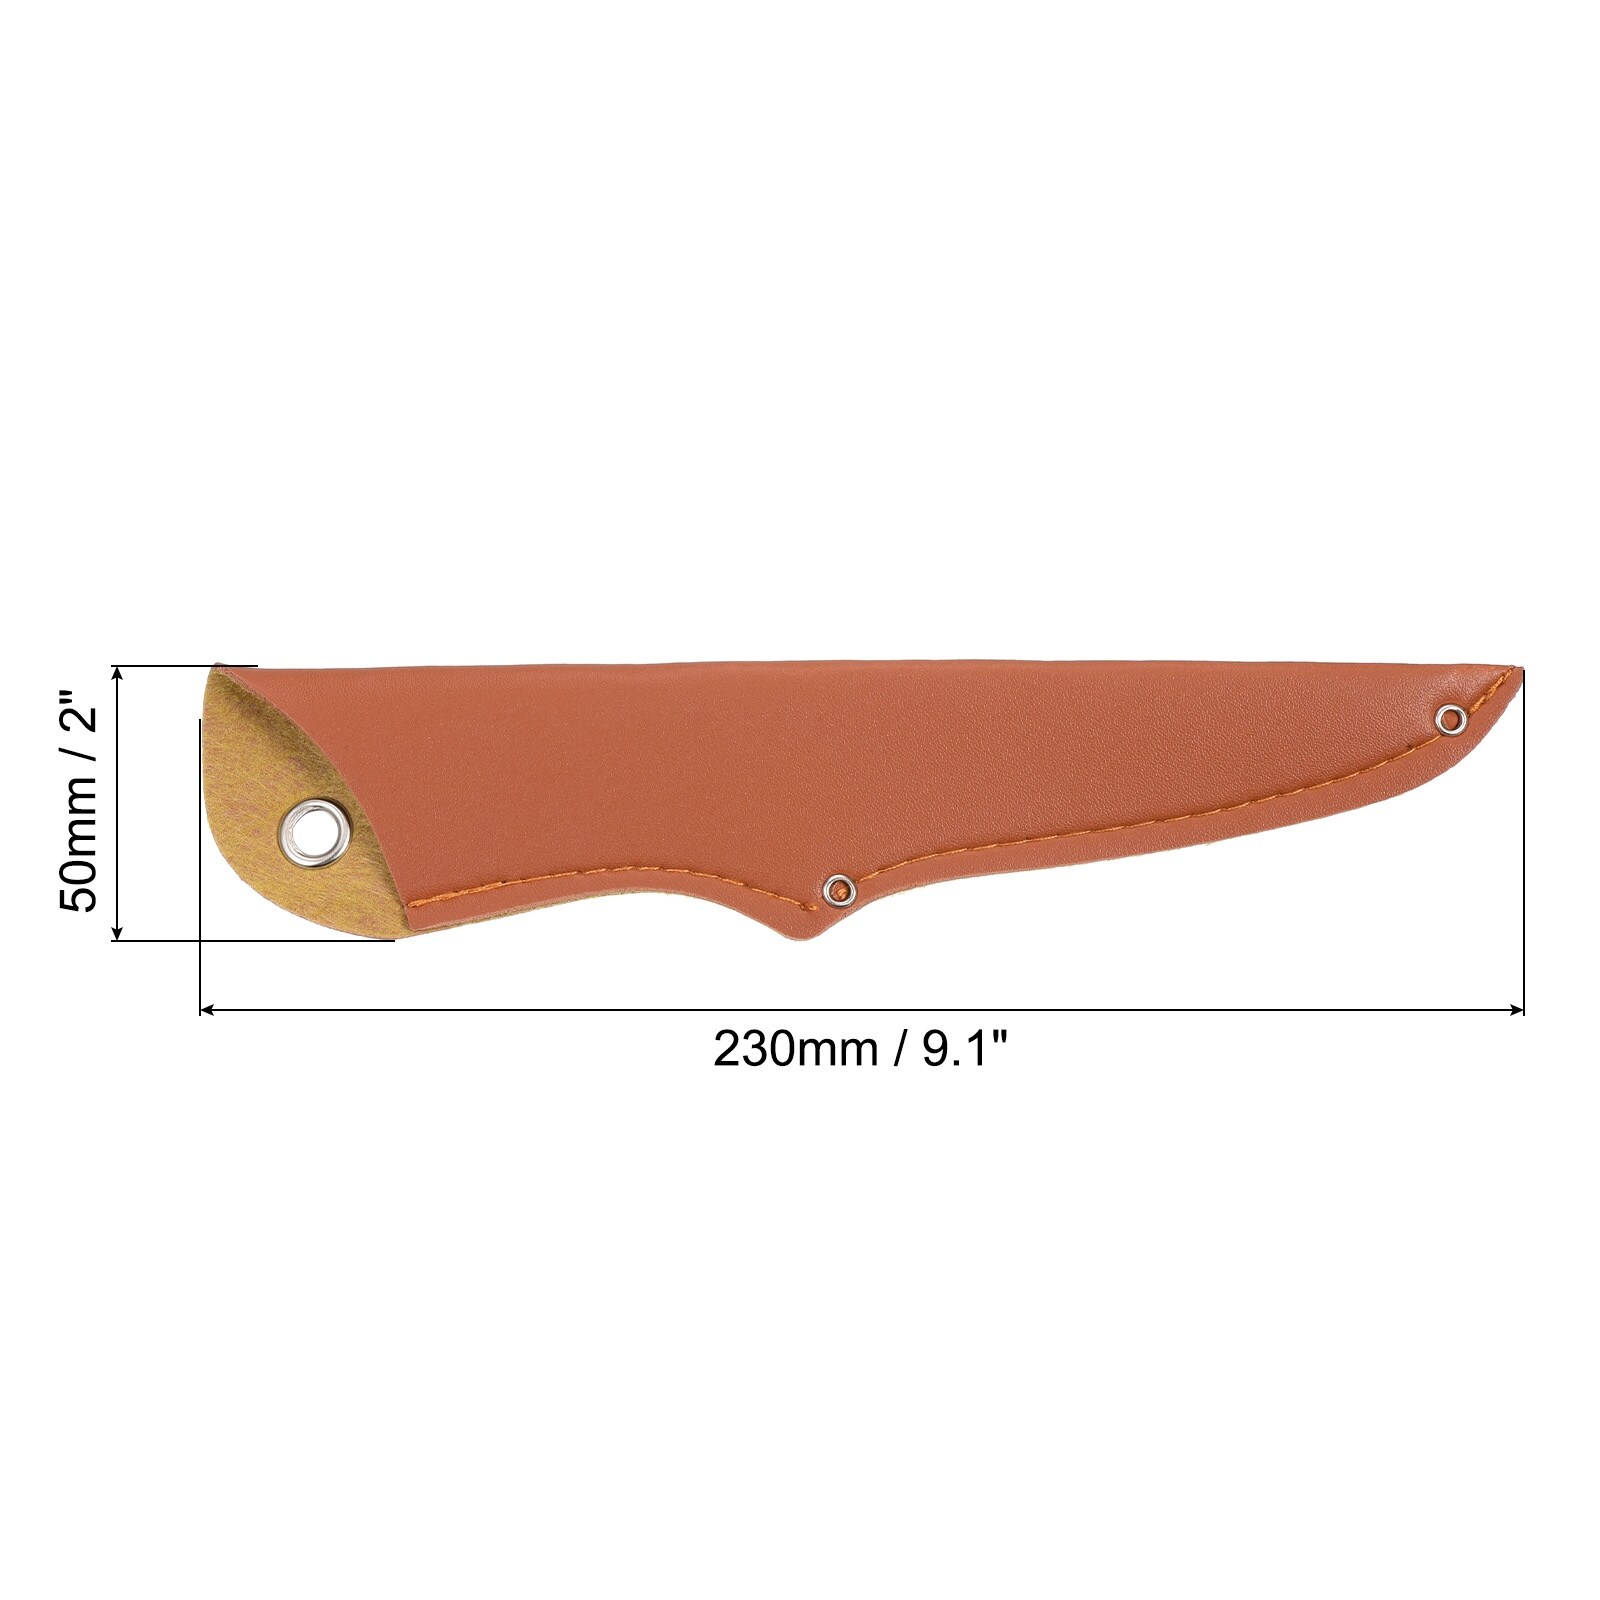 https://ak1.ostkcdn.com/images/products/is/images/direct/5e8b791303b2df5d12fc3732ad68a454367f8a8d/PU-Leather-Chef-Knife-Sheath%2C-Knife-Cover-Sleeves-for-Kitchen%2C-Brown.jpg